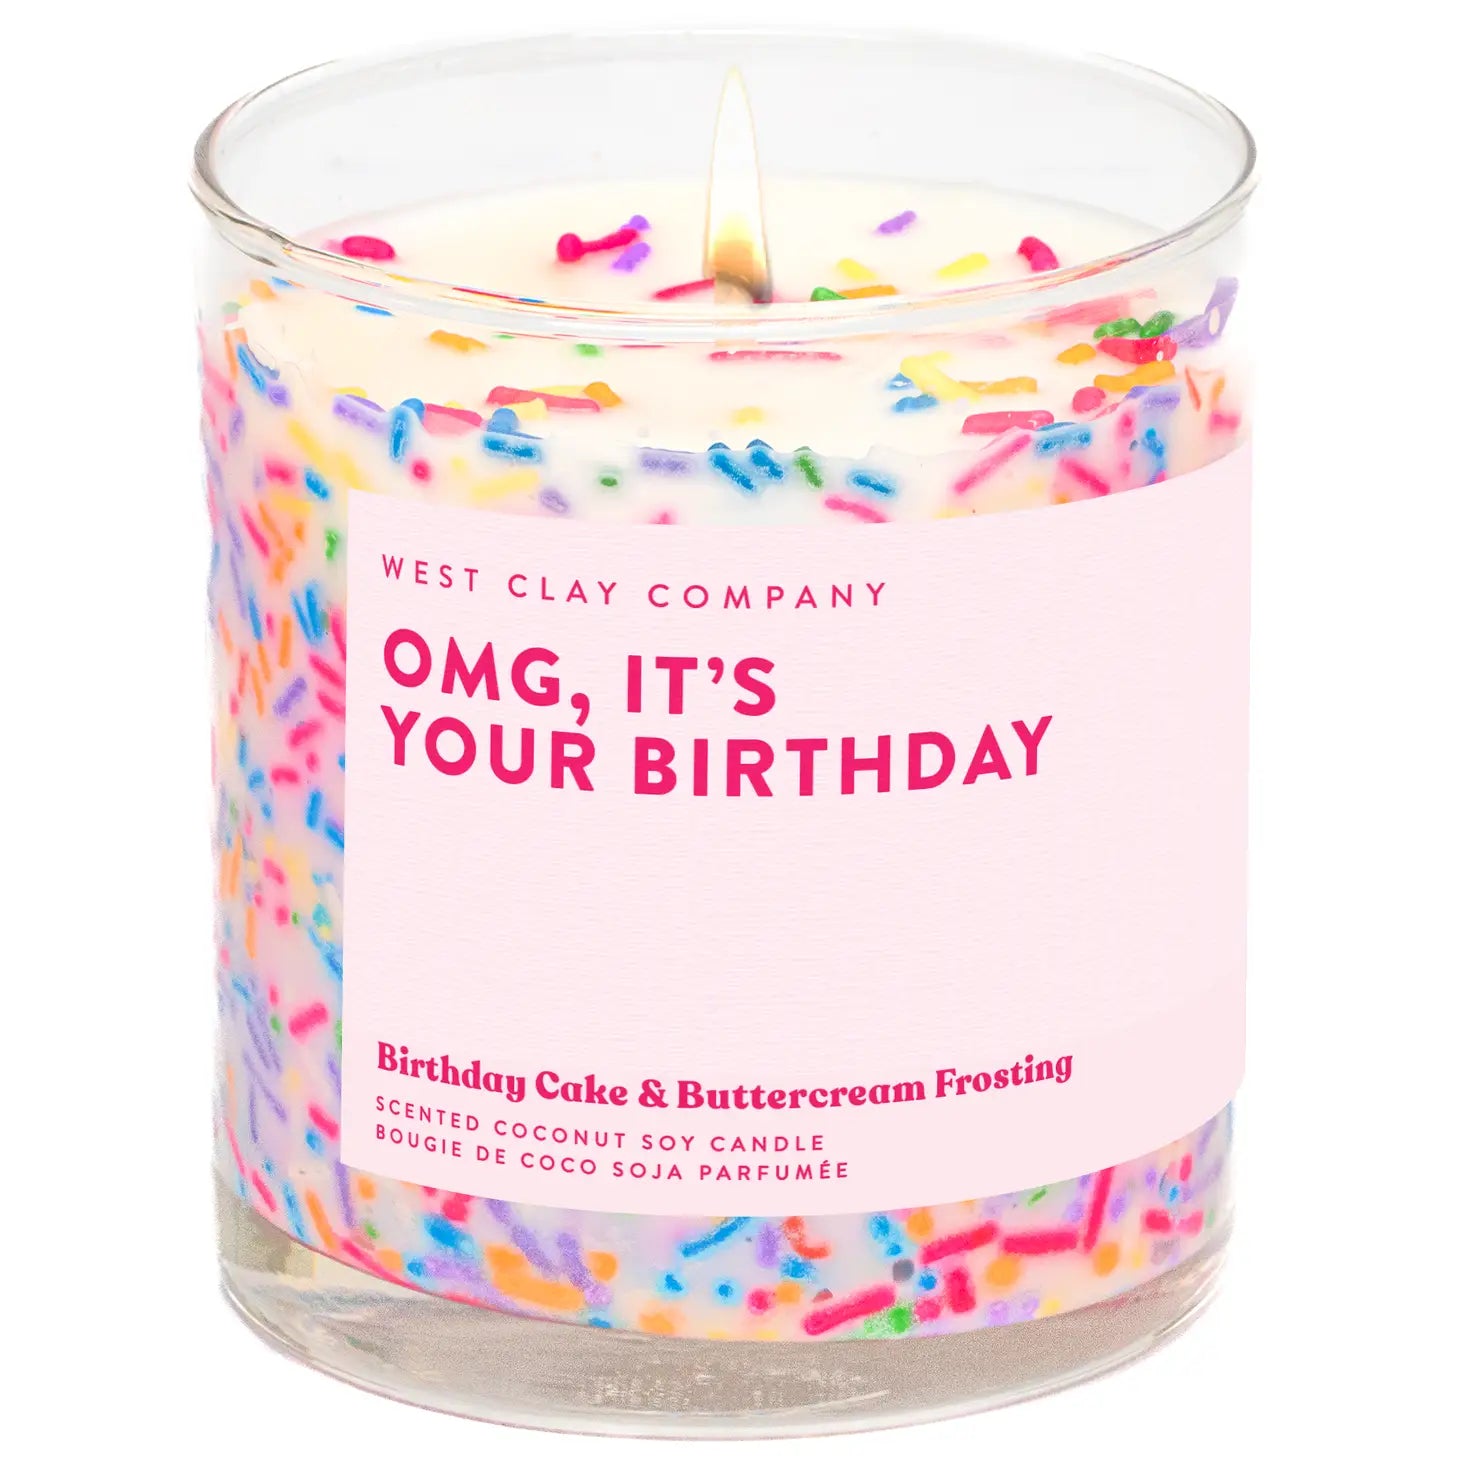 "OMG, It's Your Birthday" candle